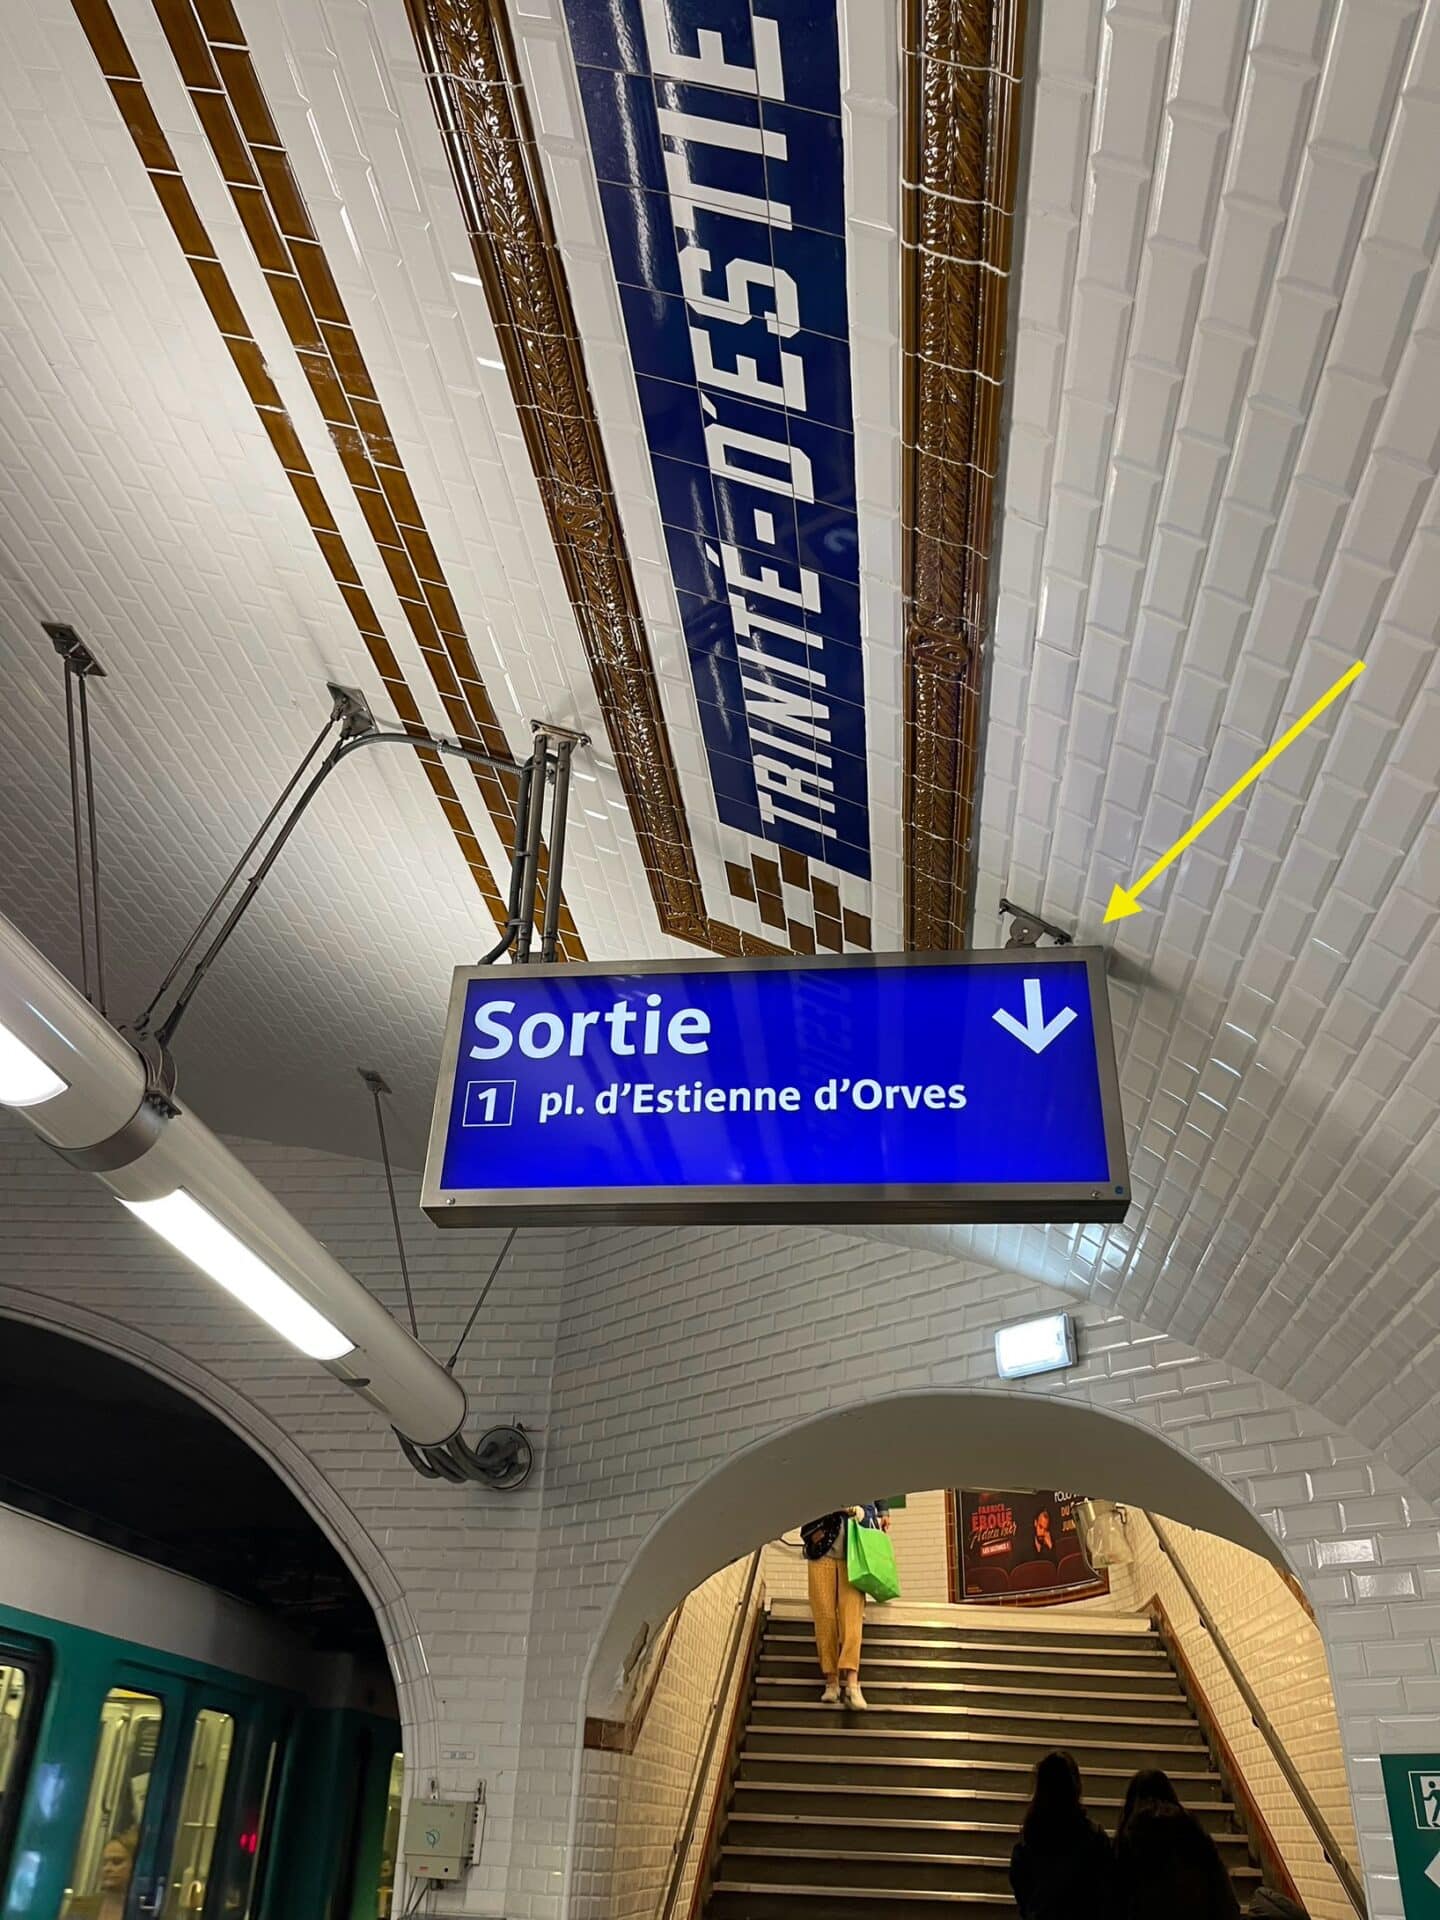 nside a Paris metro station, highlighting the iconic white tiled walls with a blue sign reading "TRINITE-D'ESTIENNE D'ORVES" and a digital blue sign pointing towards the exit at Place d'Estienne d'Orves.